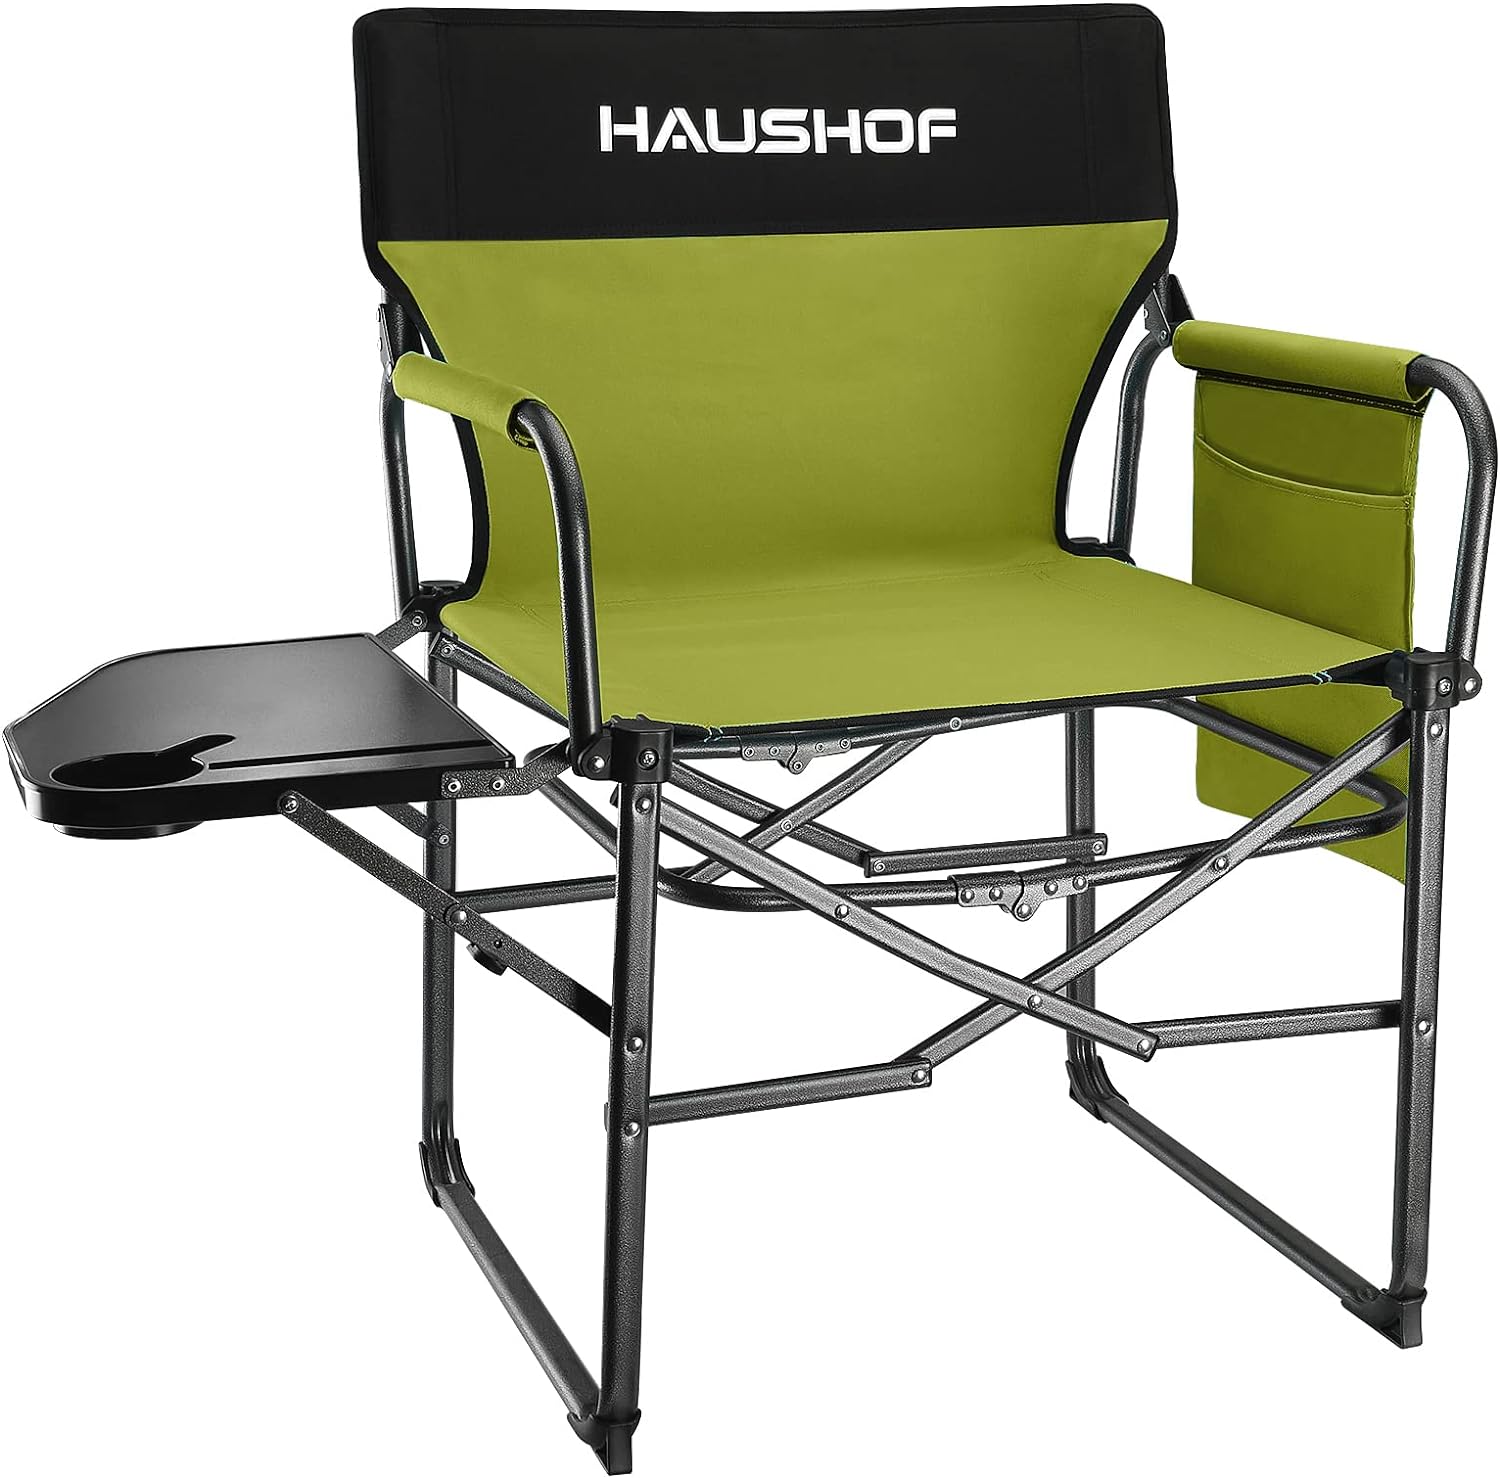 HAUSHOF Camping Chair with Side Table and Storage Pockets, Portable Folding Directors Chair, Heavy Duty Camp Chair for Adults Outdoor Fishing Beach, Green